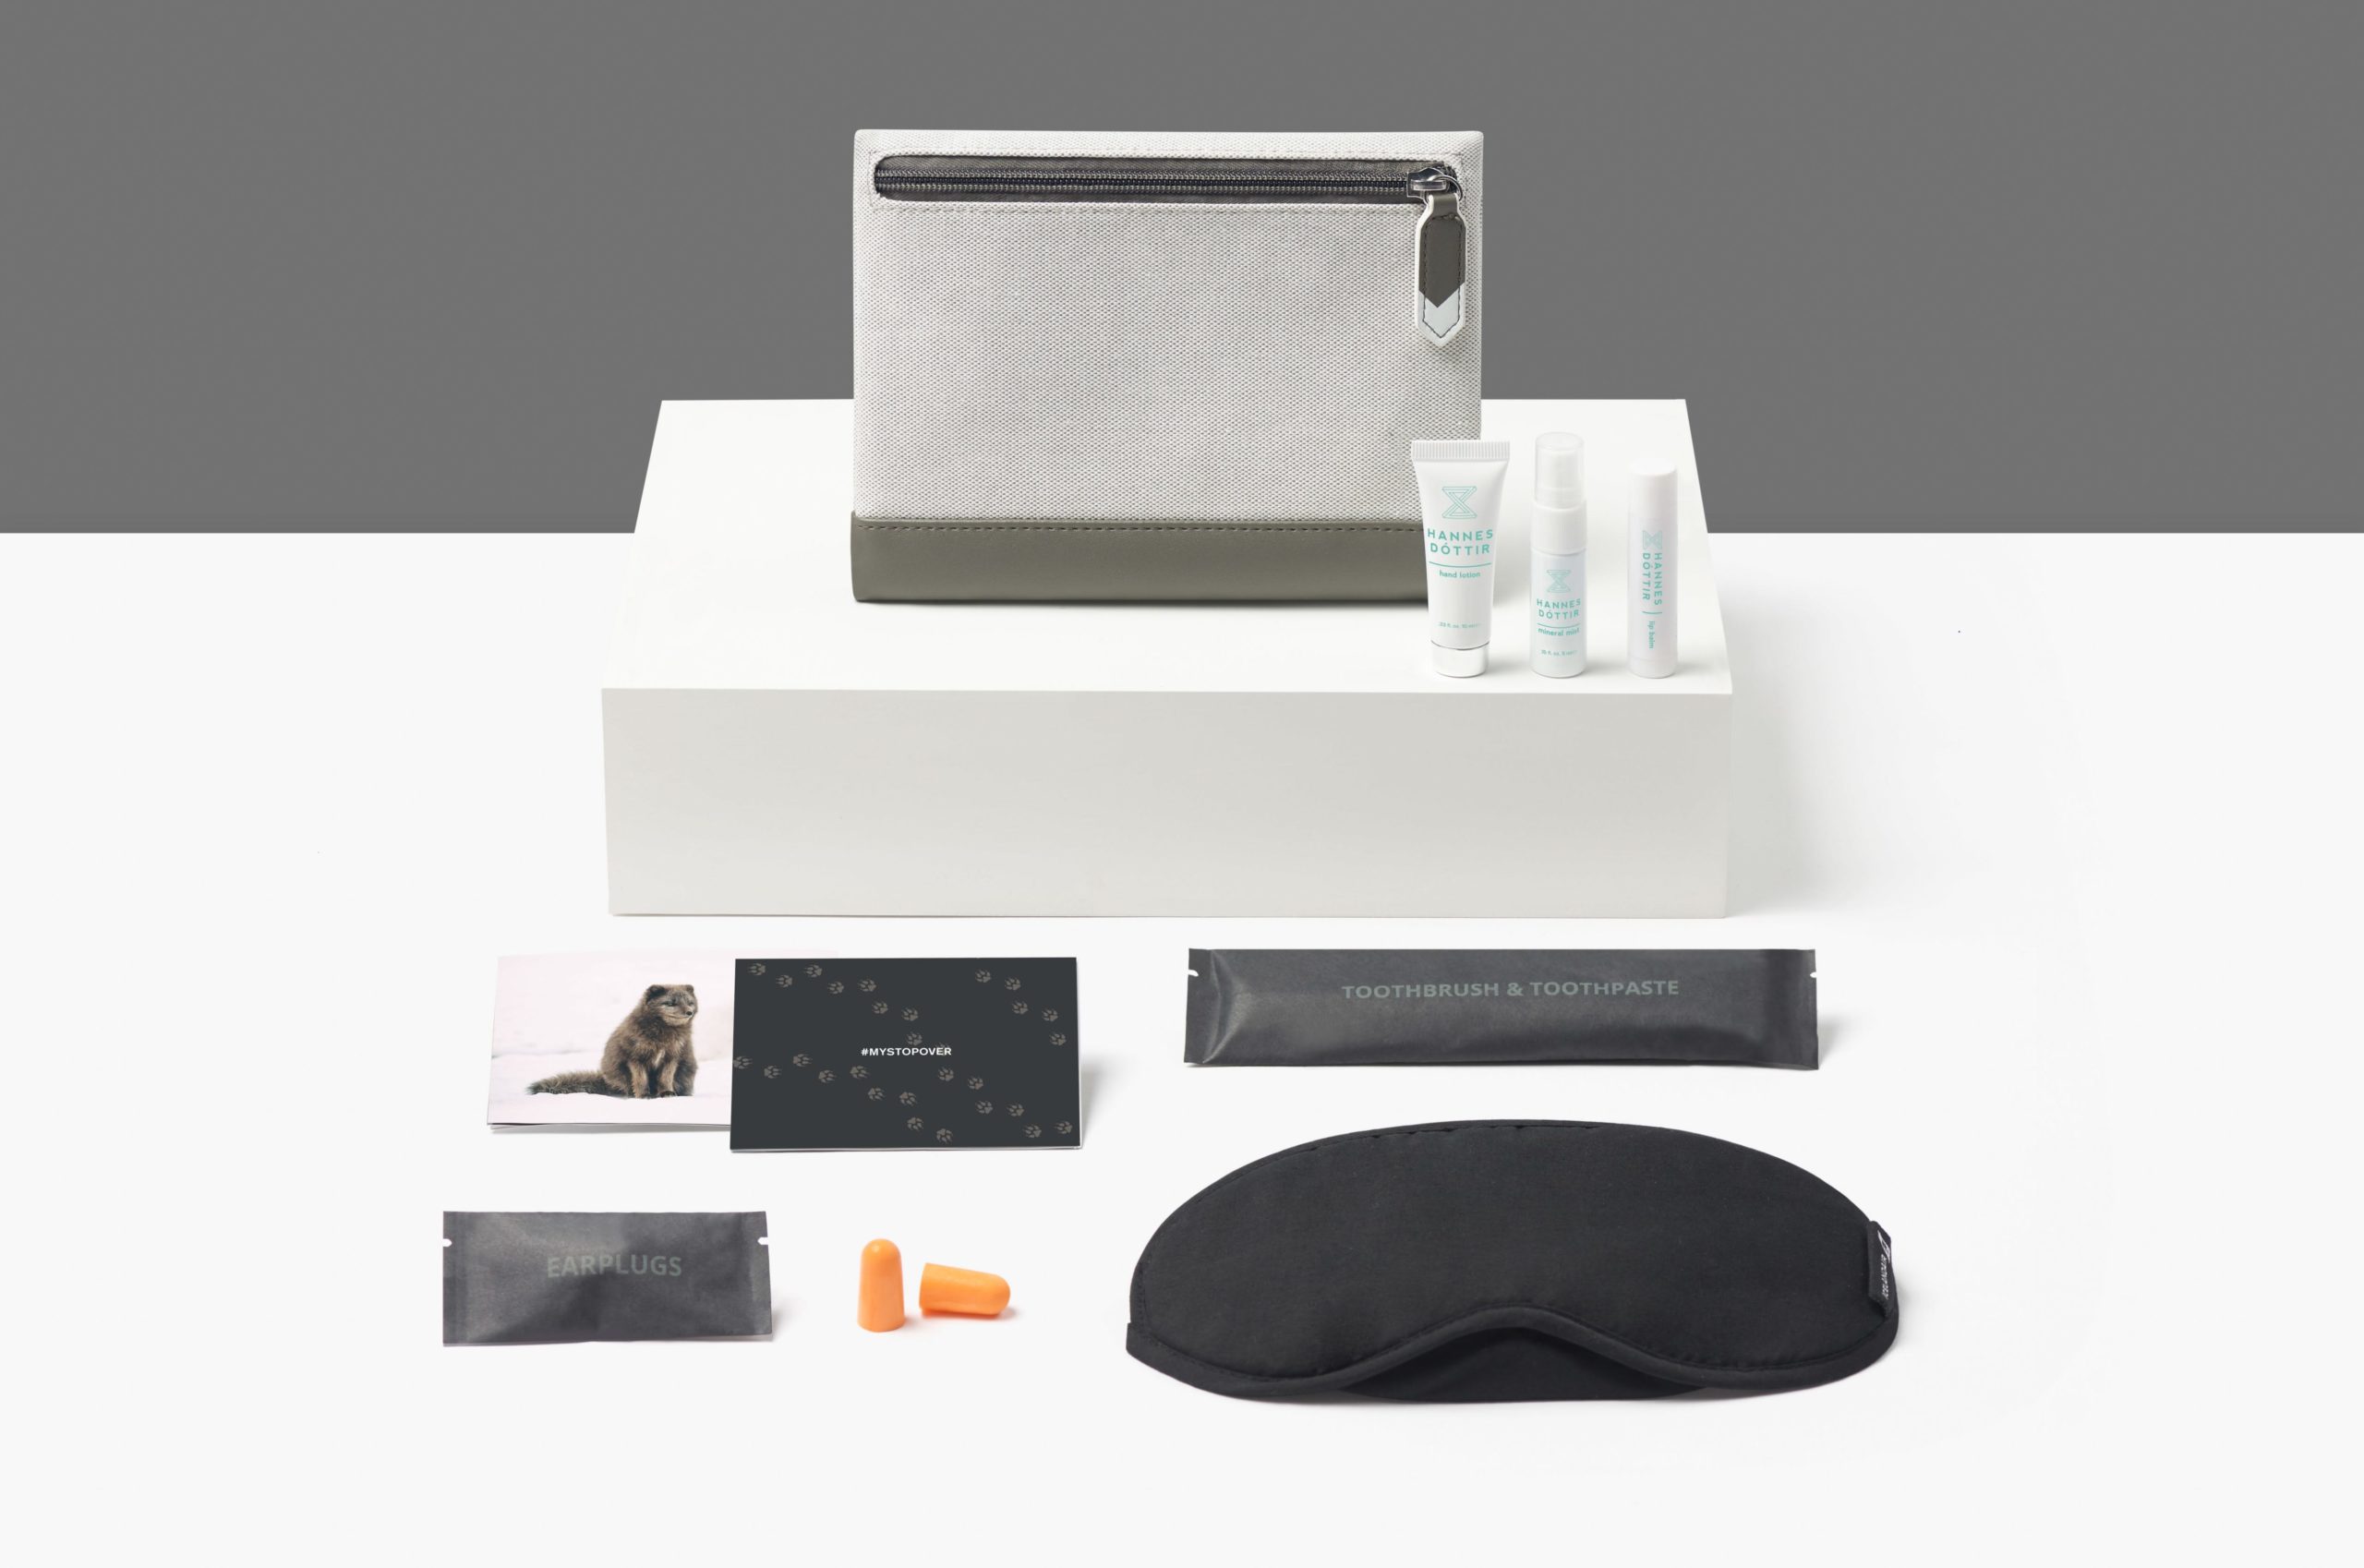 Icelandair Pays Homage to Nature with New WESSCO Amenity Kits